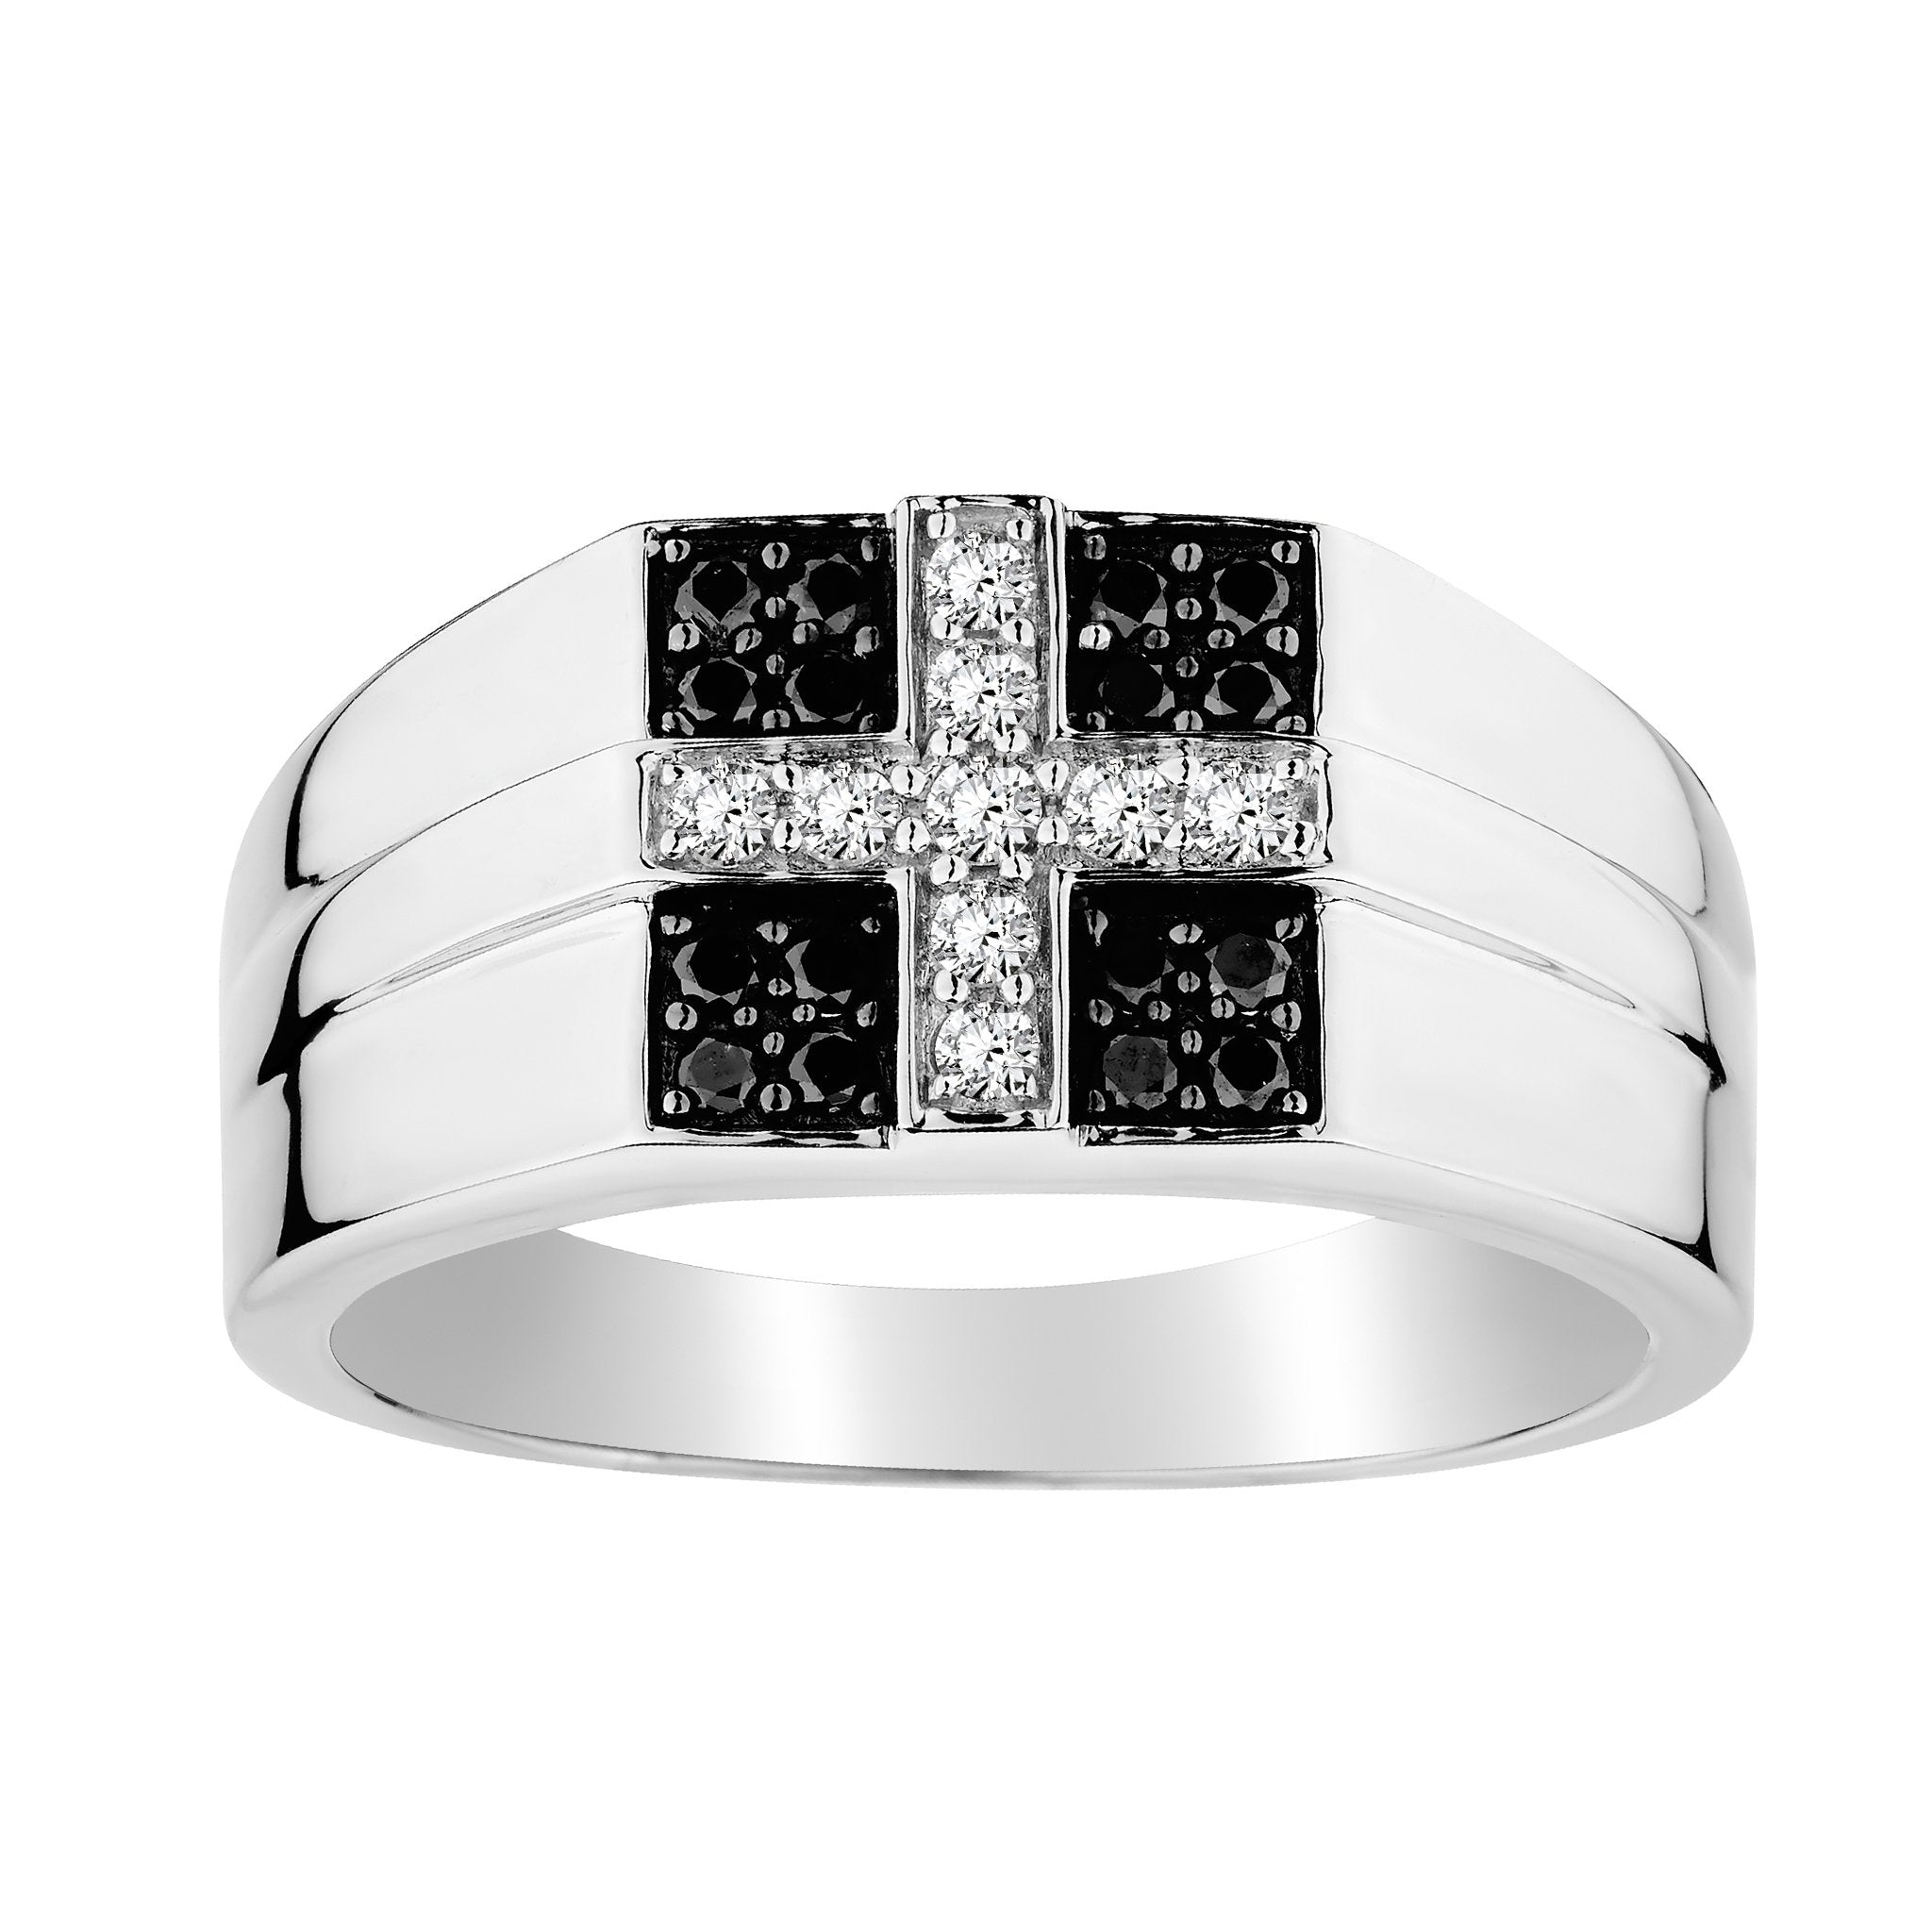 .40 CARAT BLACK AND WHITE DIAMOND CROSS GENTLEMAN'S RING, 10kt WHITE GOLD…...................NOW - Griffin Jewellery Designs